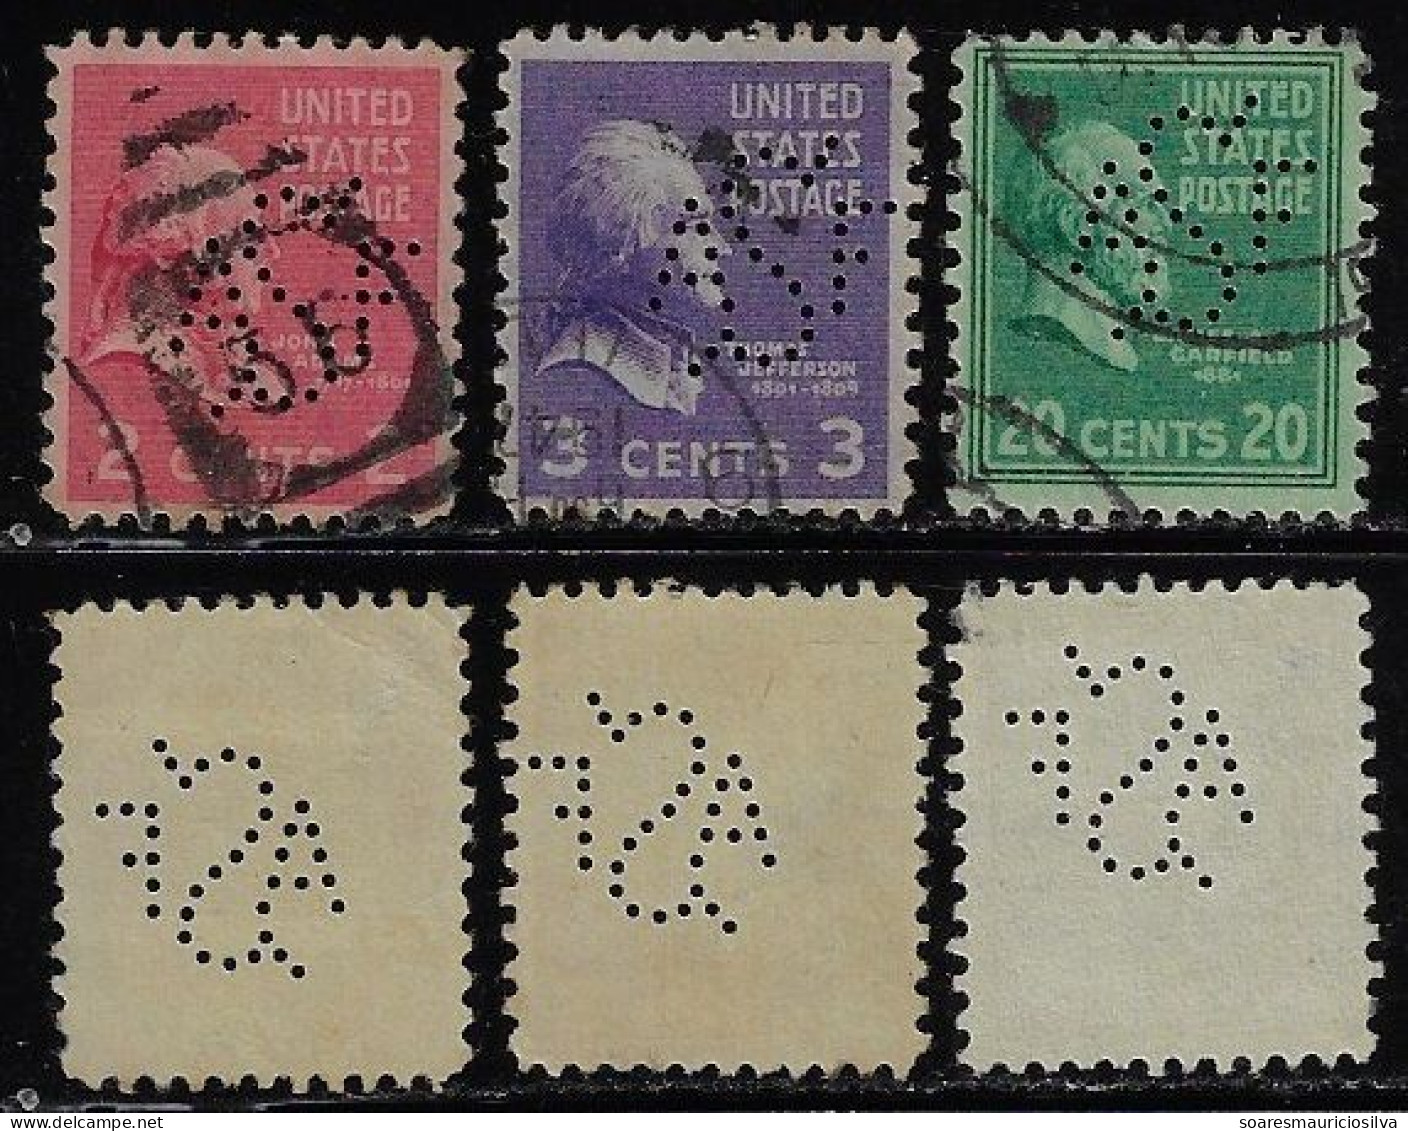 USA United States 1918/1942 3 Stamp With Perfin ASF By American Steel Foundries From Chicago Lochung Perfore - Perfins